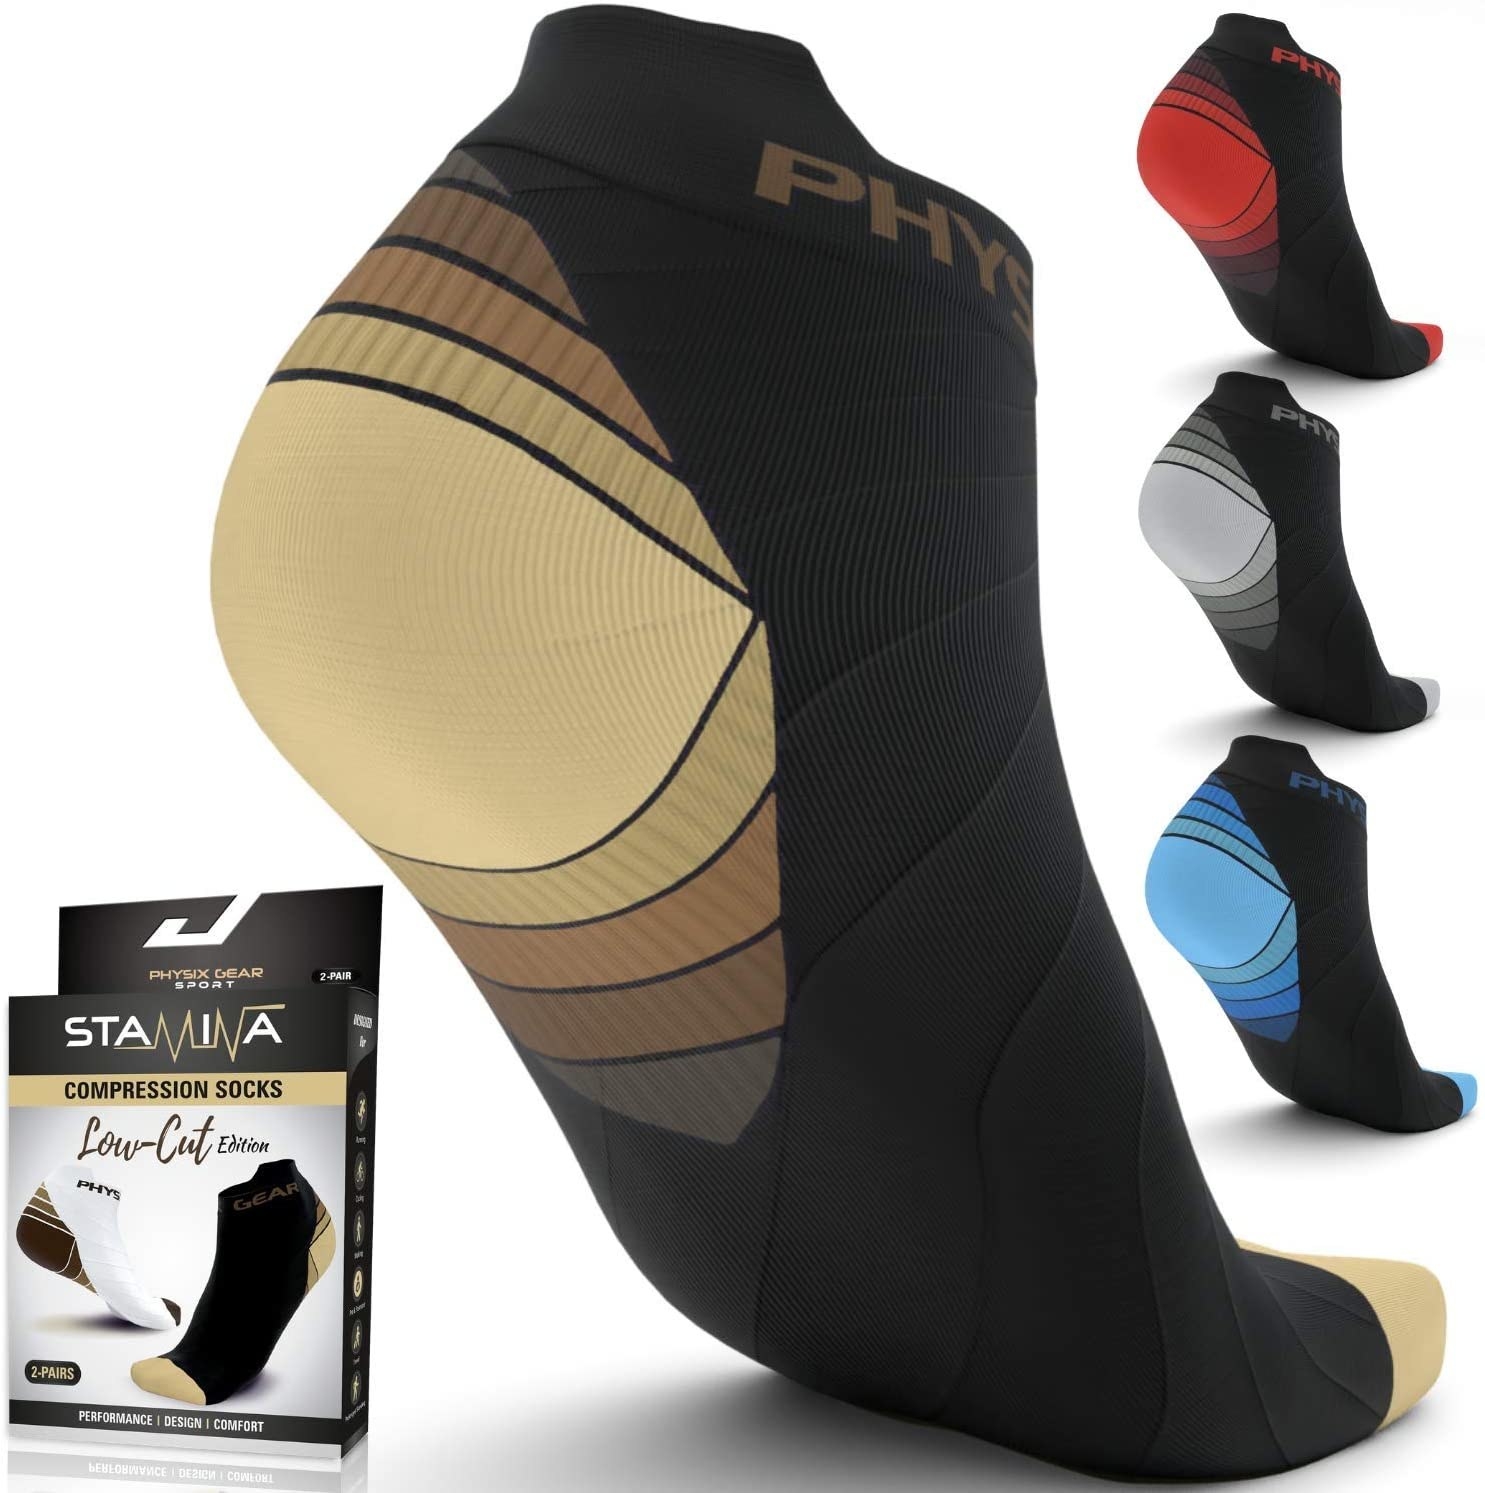 A pair of compression socks that reach the ankle